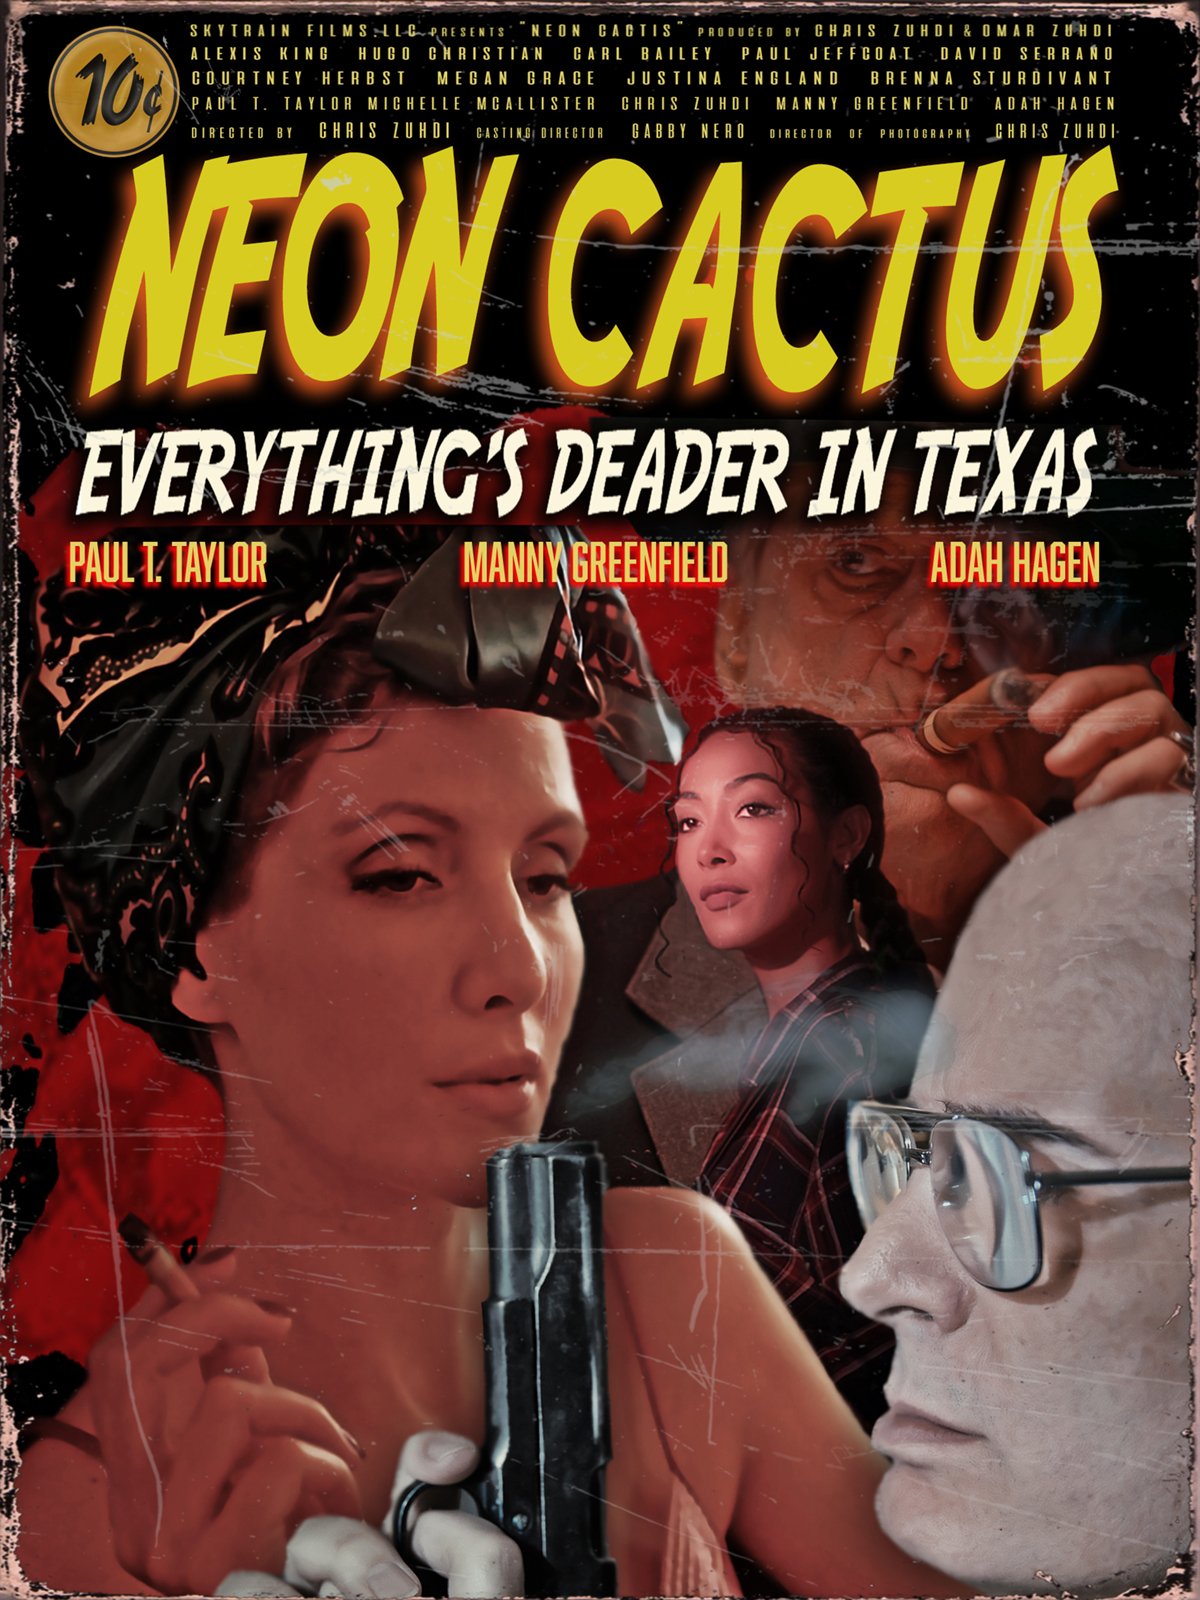 Neon Cactus Movie 2023, Official Trailer, Release Date, HD Poster 